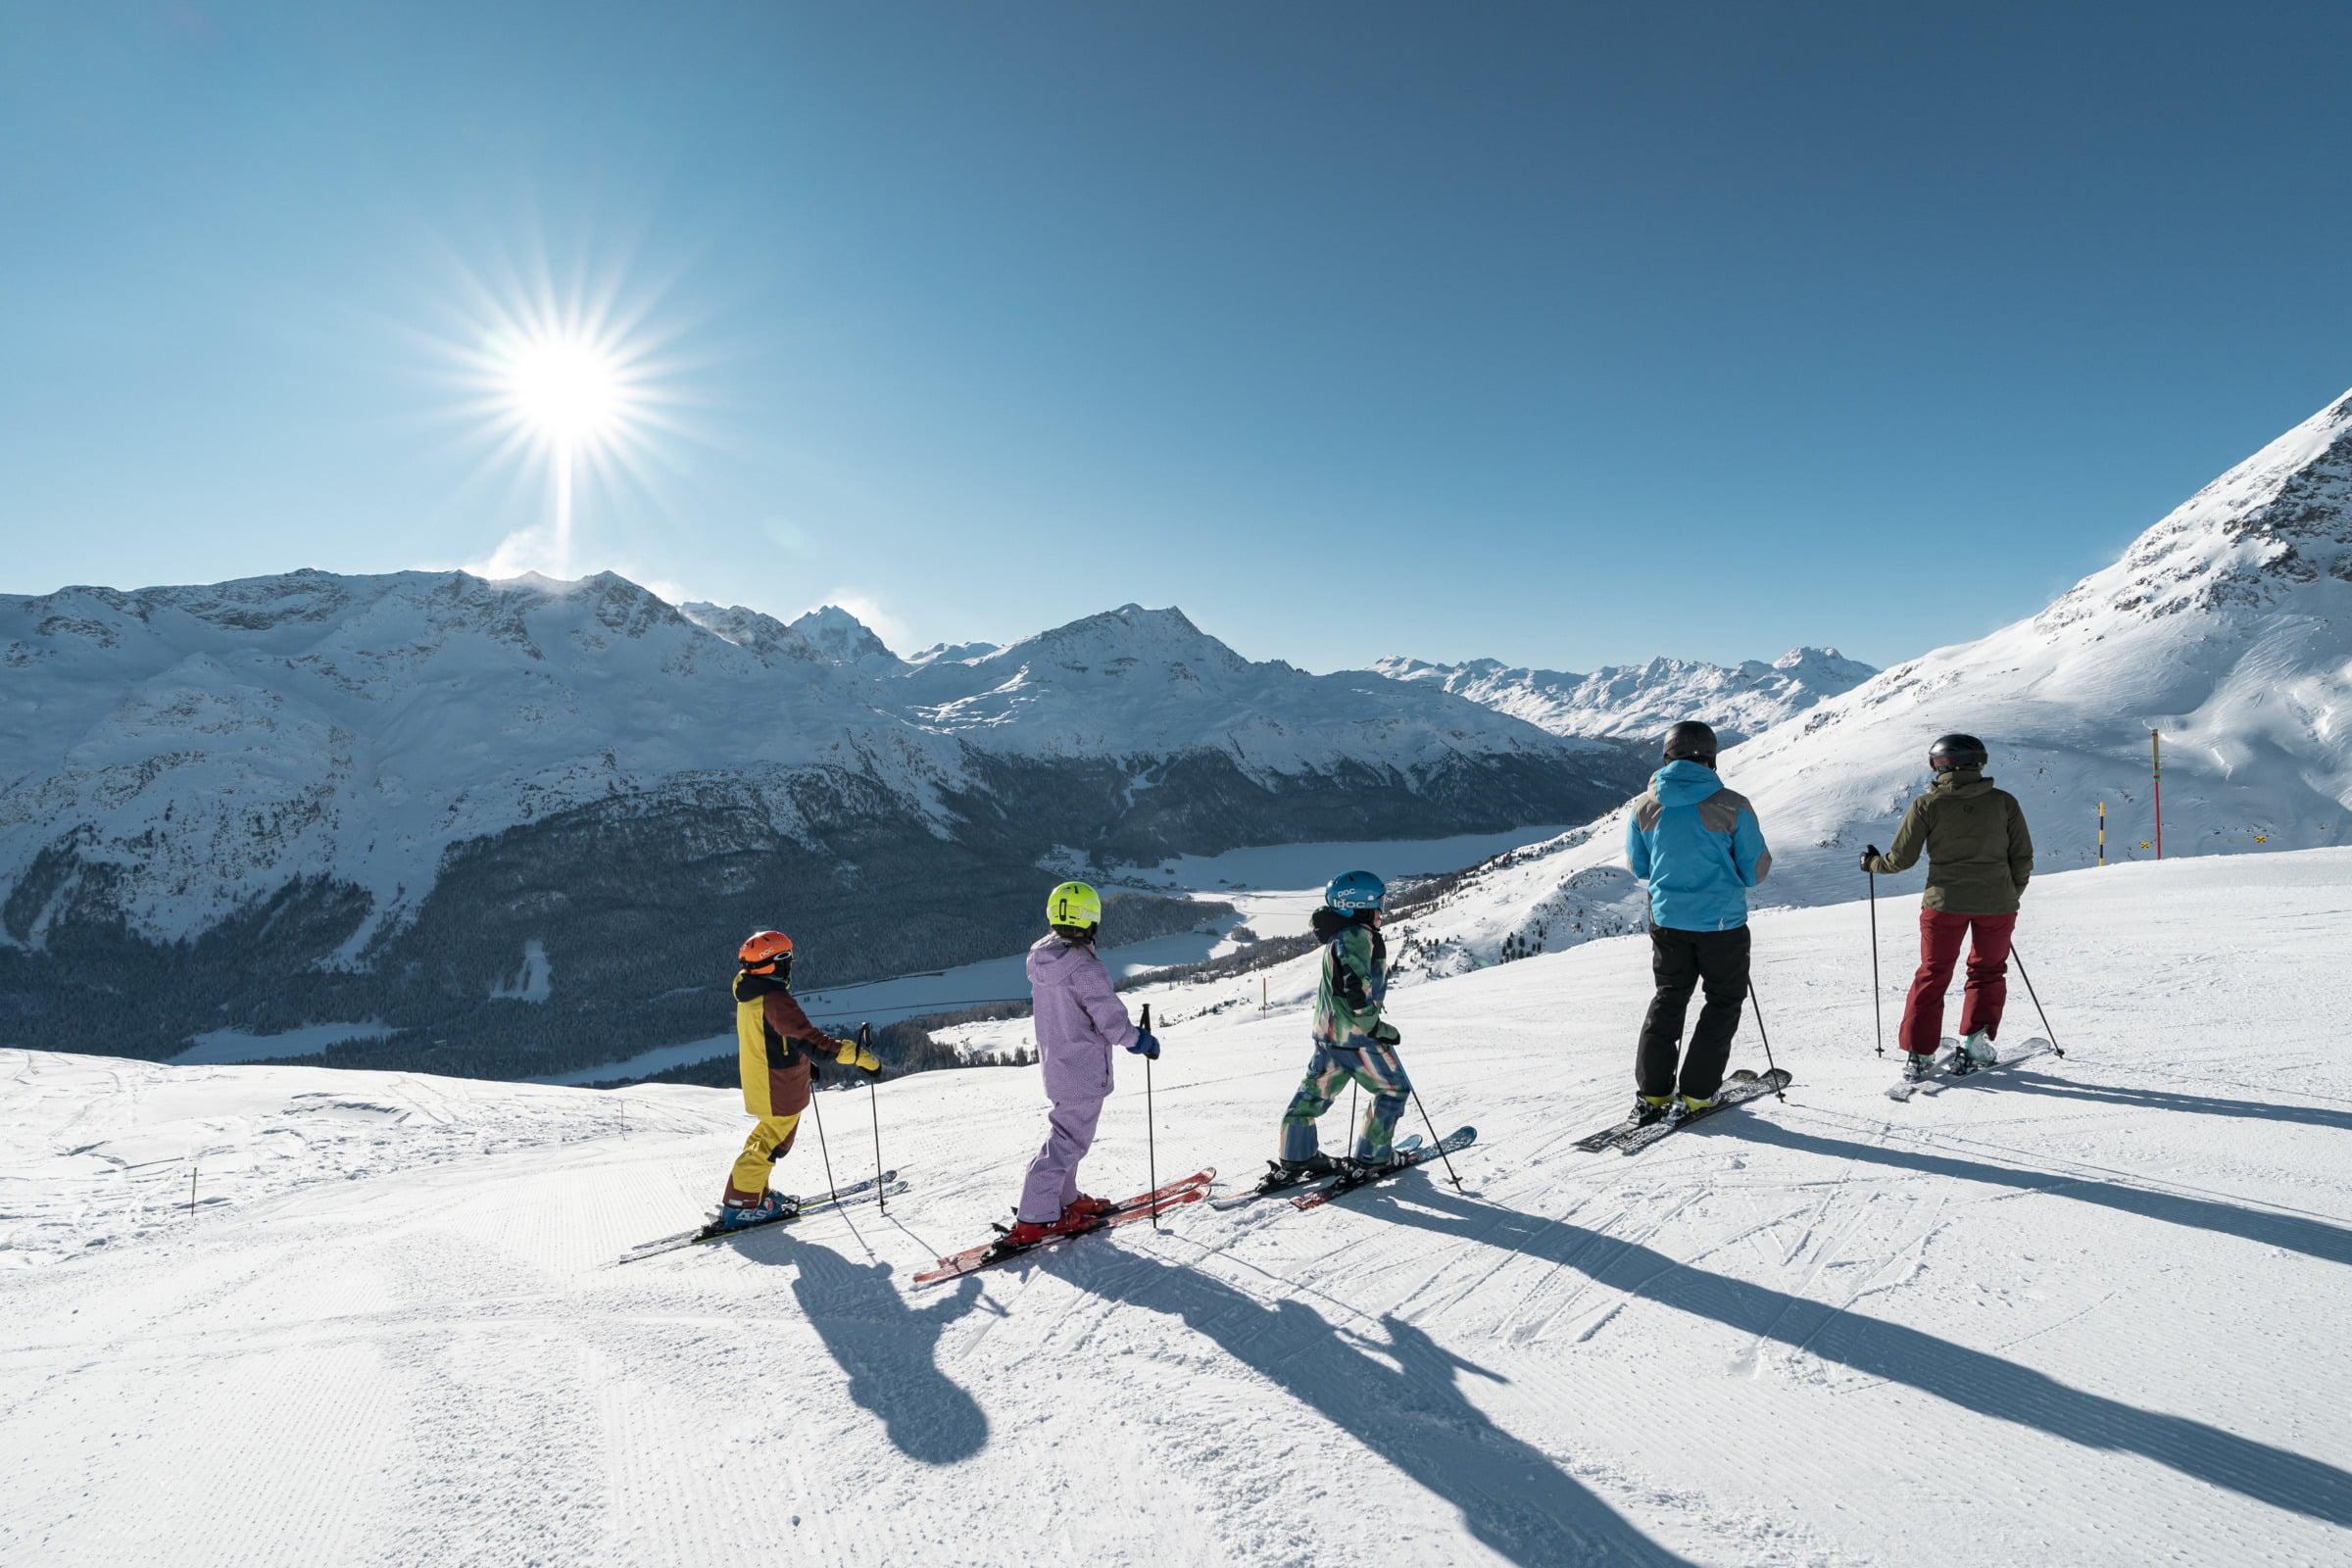 Family Pass - the ski pass for the whole family